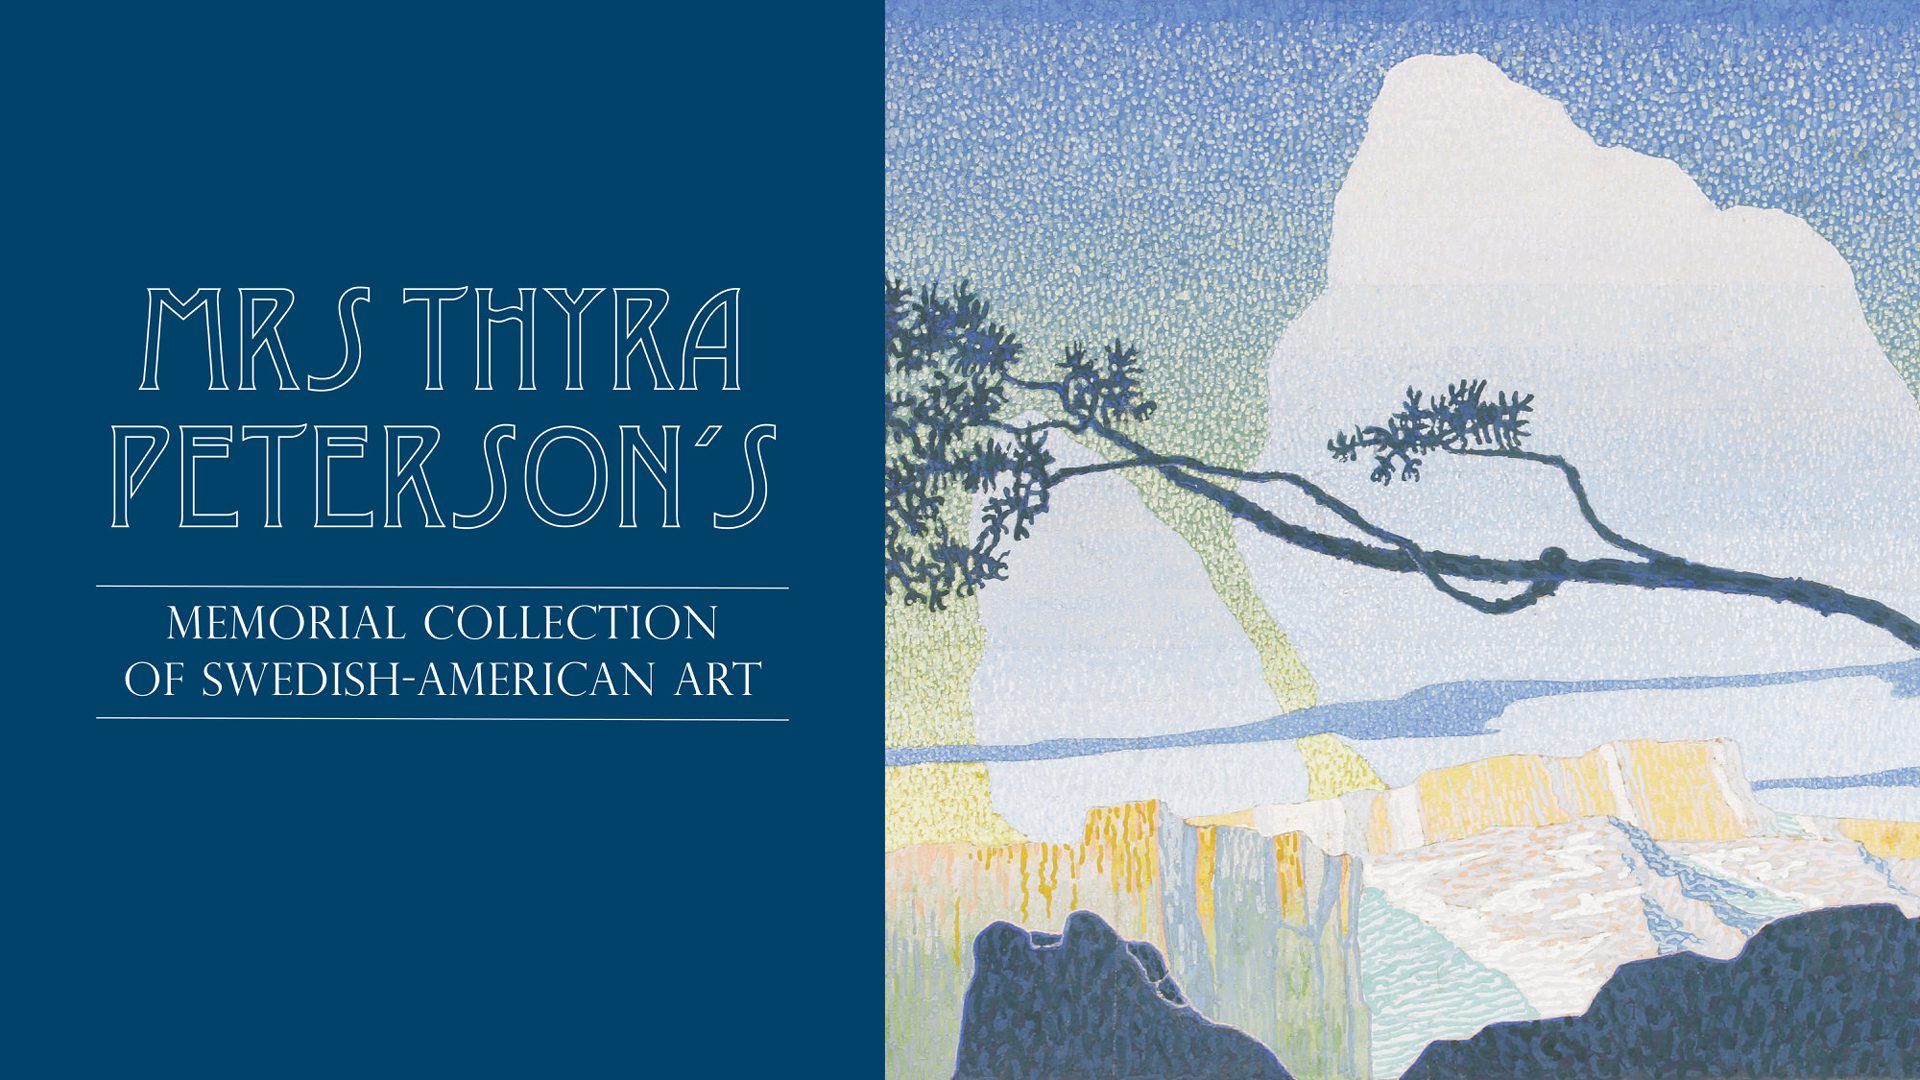 Mrs Thyra Peterson´s Memorial Collection of Swedish-American Art